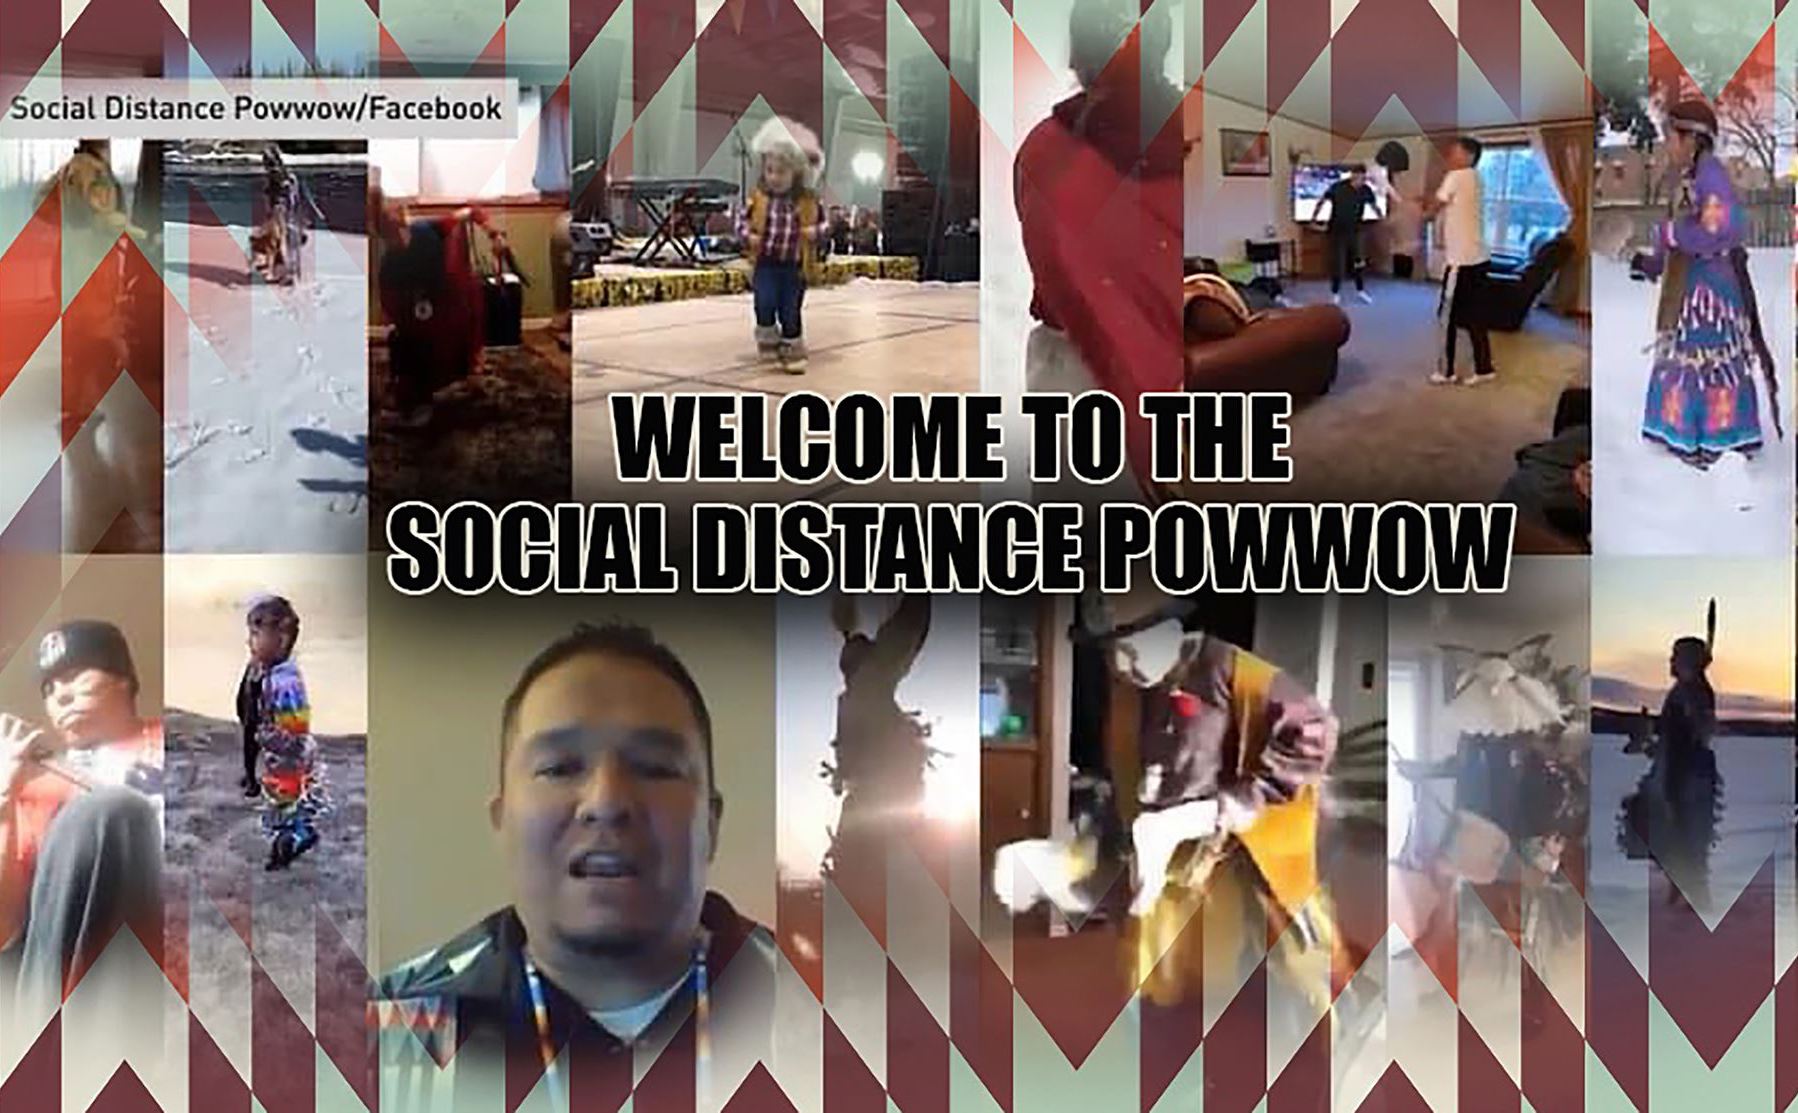 Powwows move online to keep Indigenous communities together